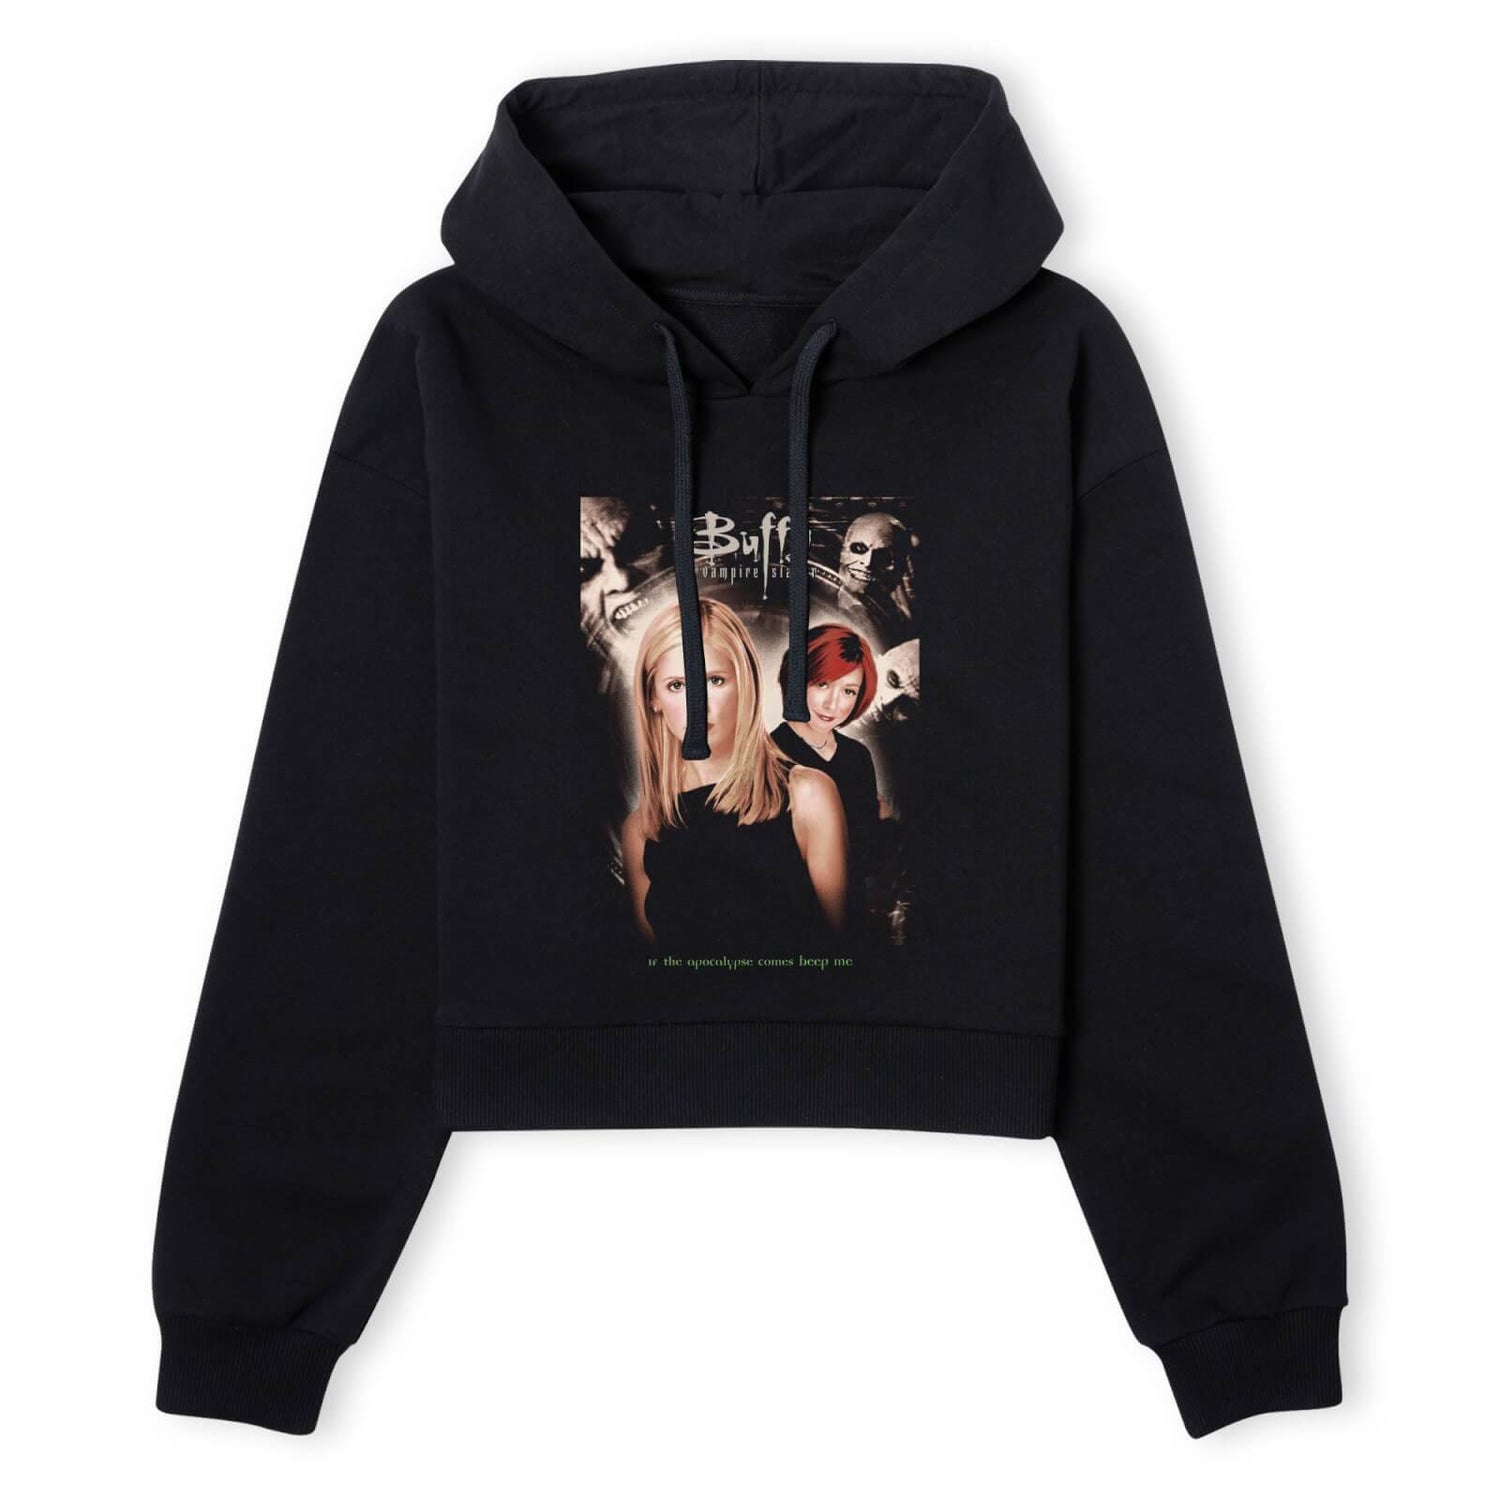 Buffy The Vampire Slayer S4 Poster Women's Cropped Hoodie - Black